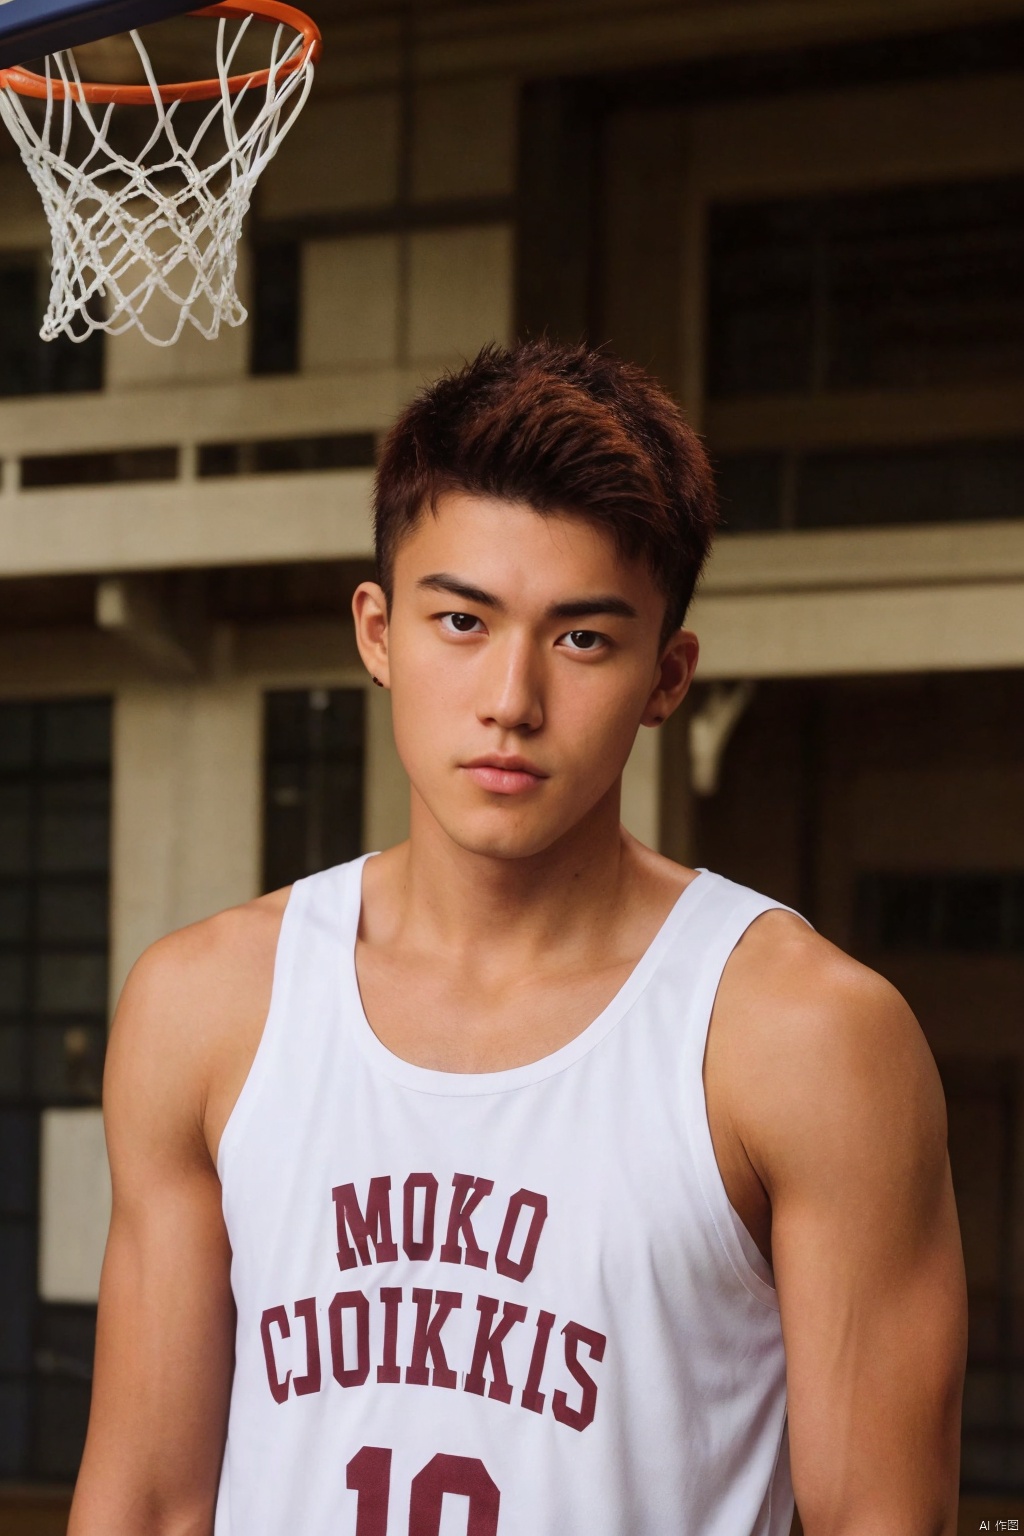 （rutilism：2）,full body,Sakuragi Hanamichi  ,Playing Basketball,red hair boy,basketball court,（red hair：2）,1boy,handsome ,wearing a red and white top **** with text "10",1man,basketball,18 years old,asian,**** top ,ymhd,,red and white basketball vest,school,single-fold eyelid,1man,Mandibular angle,,（manly face：1.3） ,Sparkling, photorealistic,CodeMan001, CodeMan001, evil person, Oguri